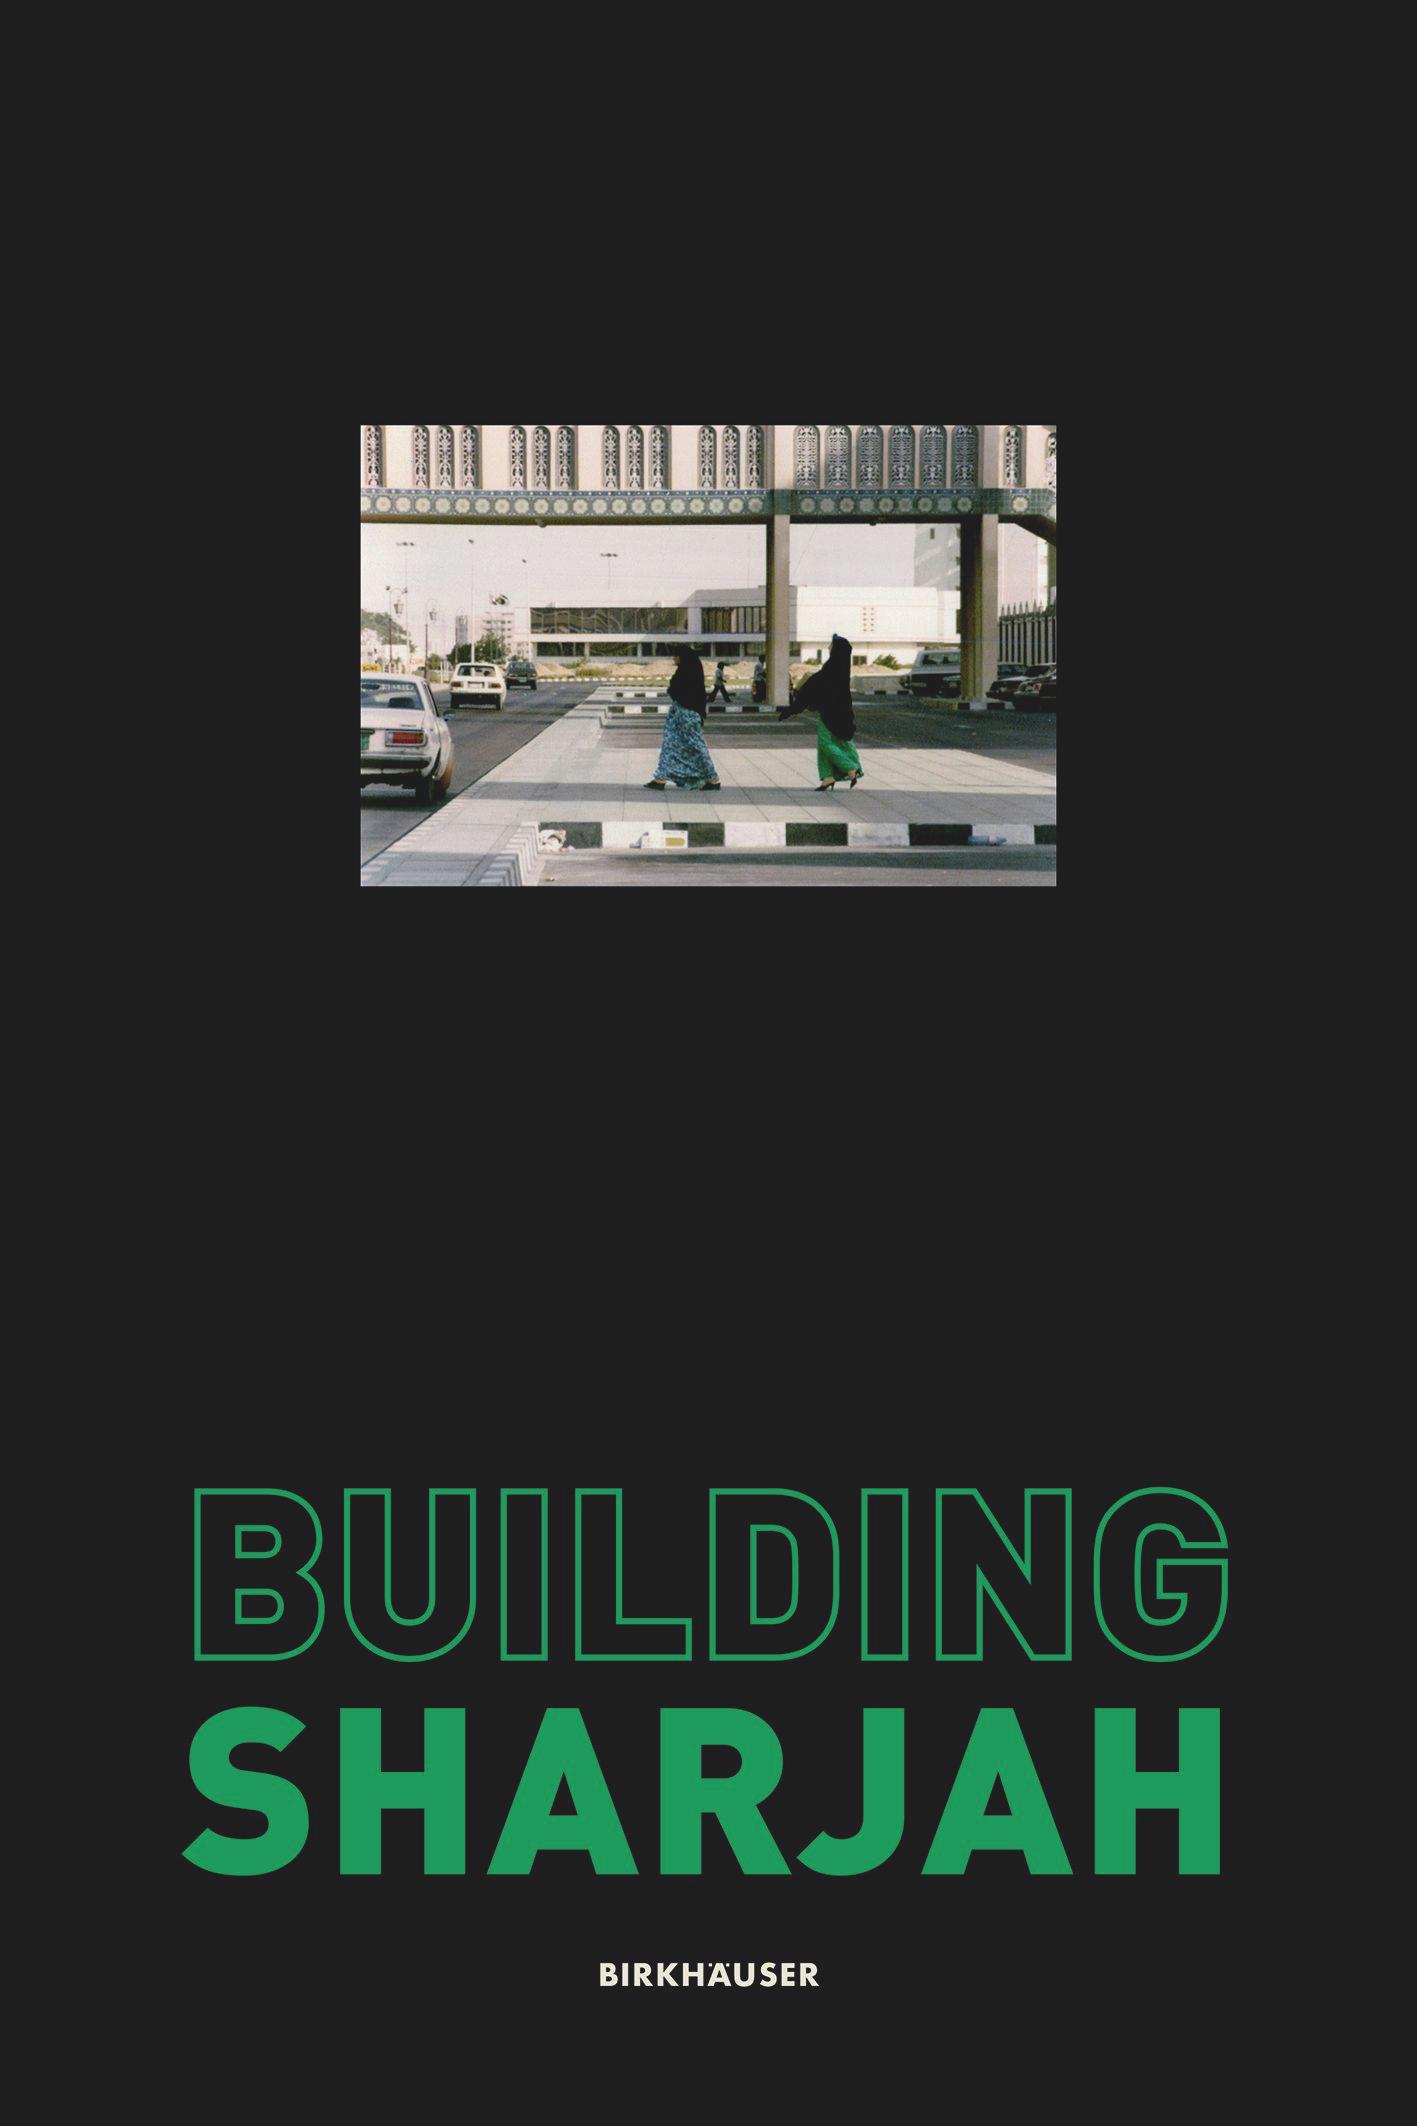 Building Sharjah's cover